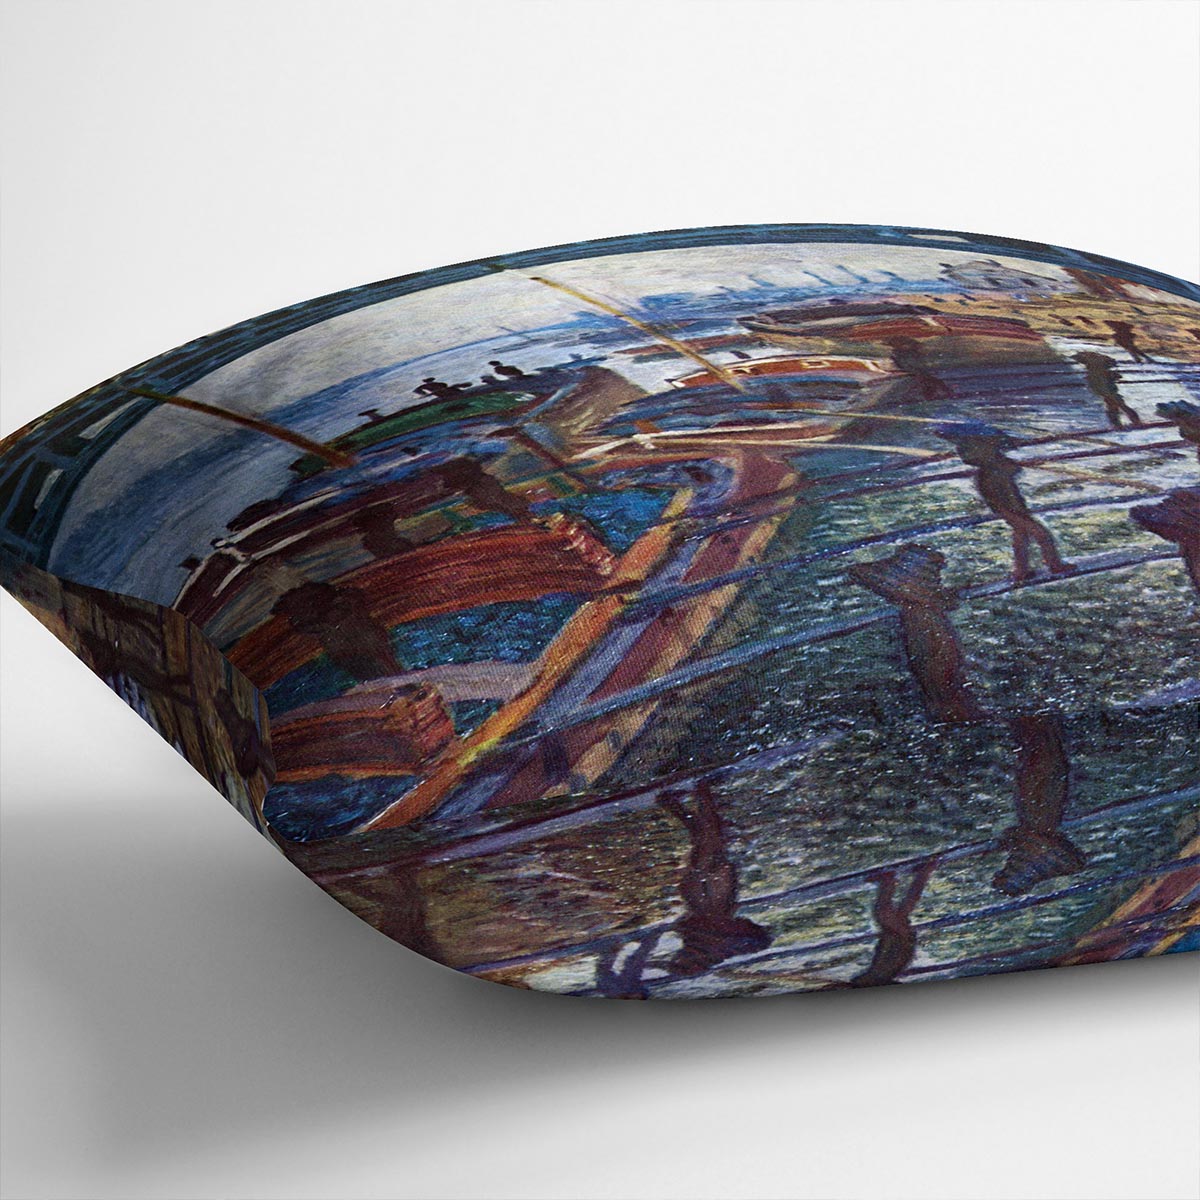 The coal carrier by Monet Cushion